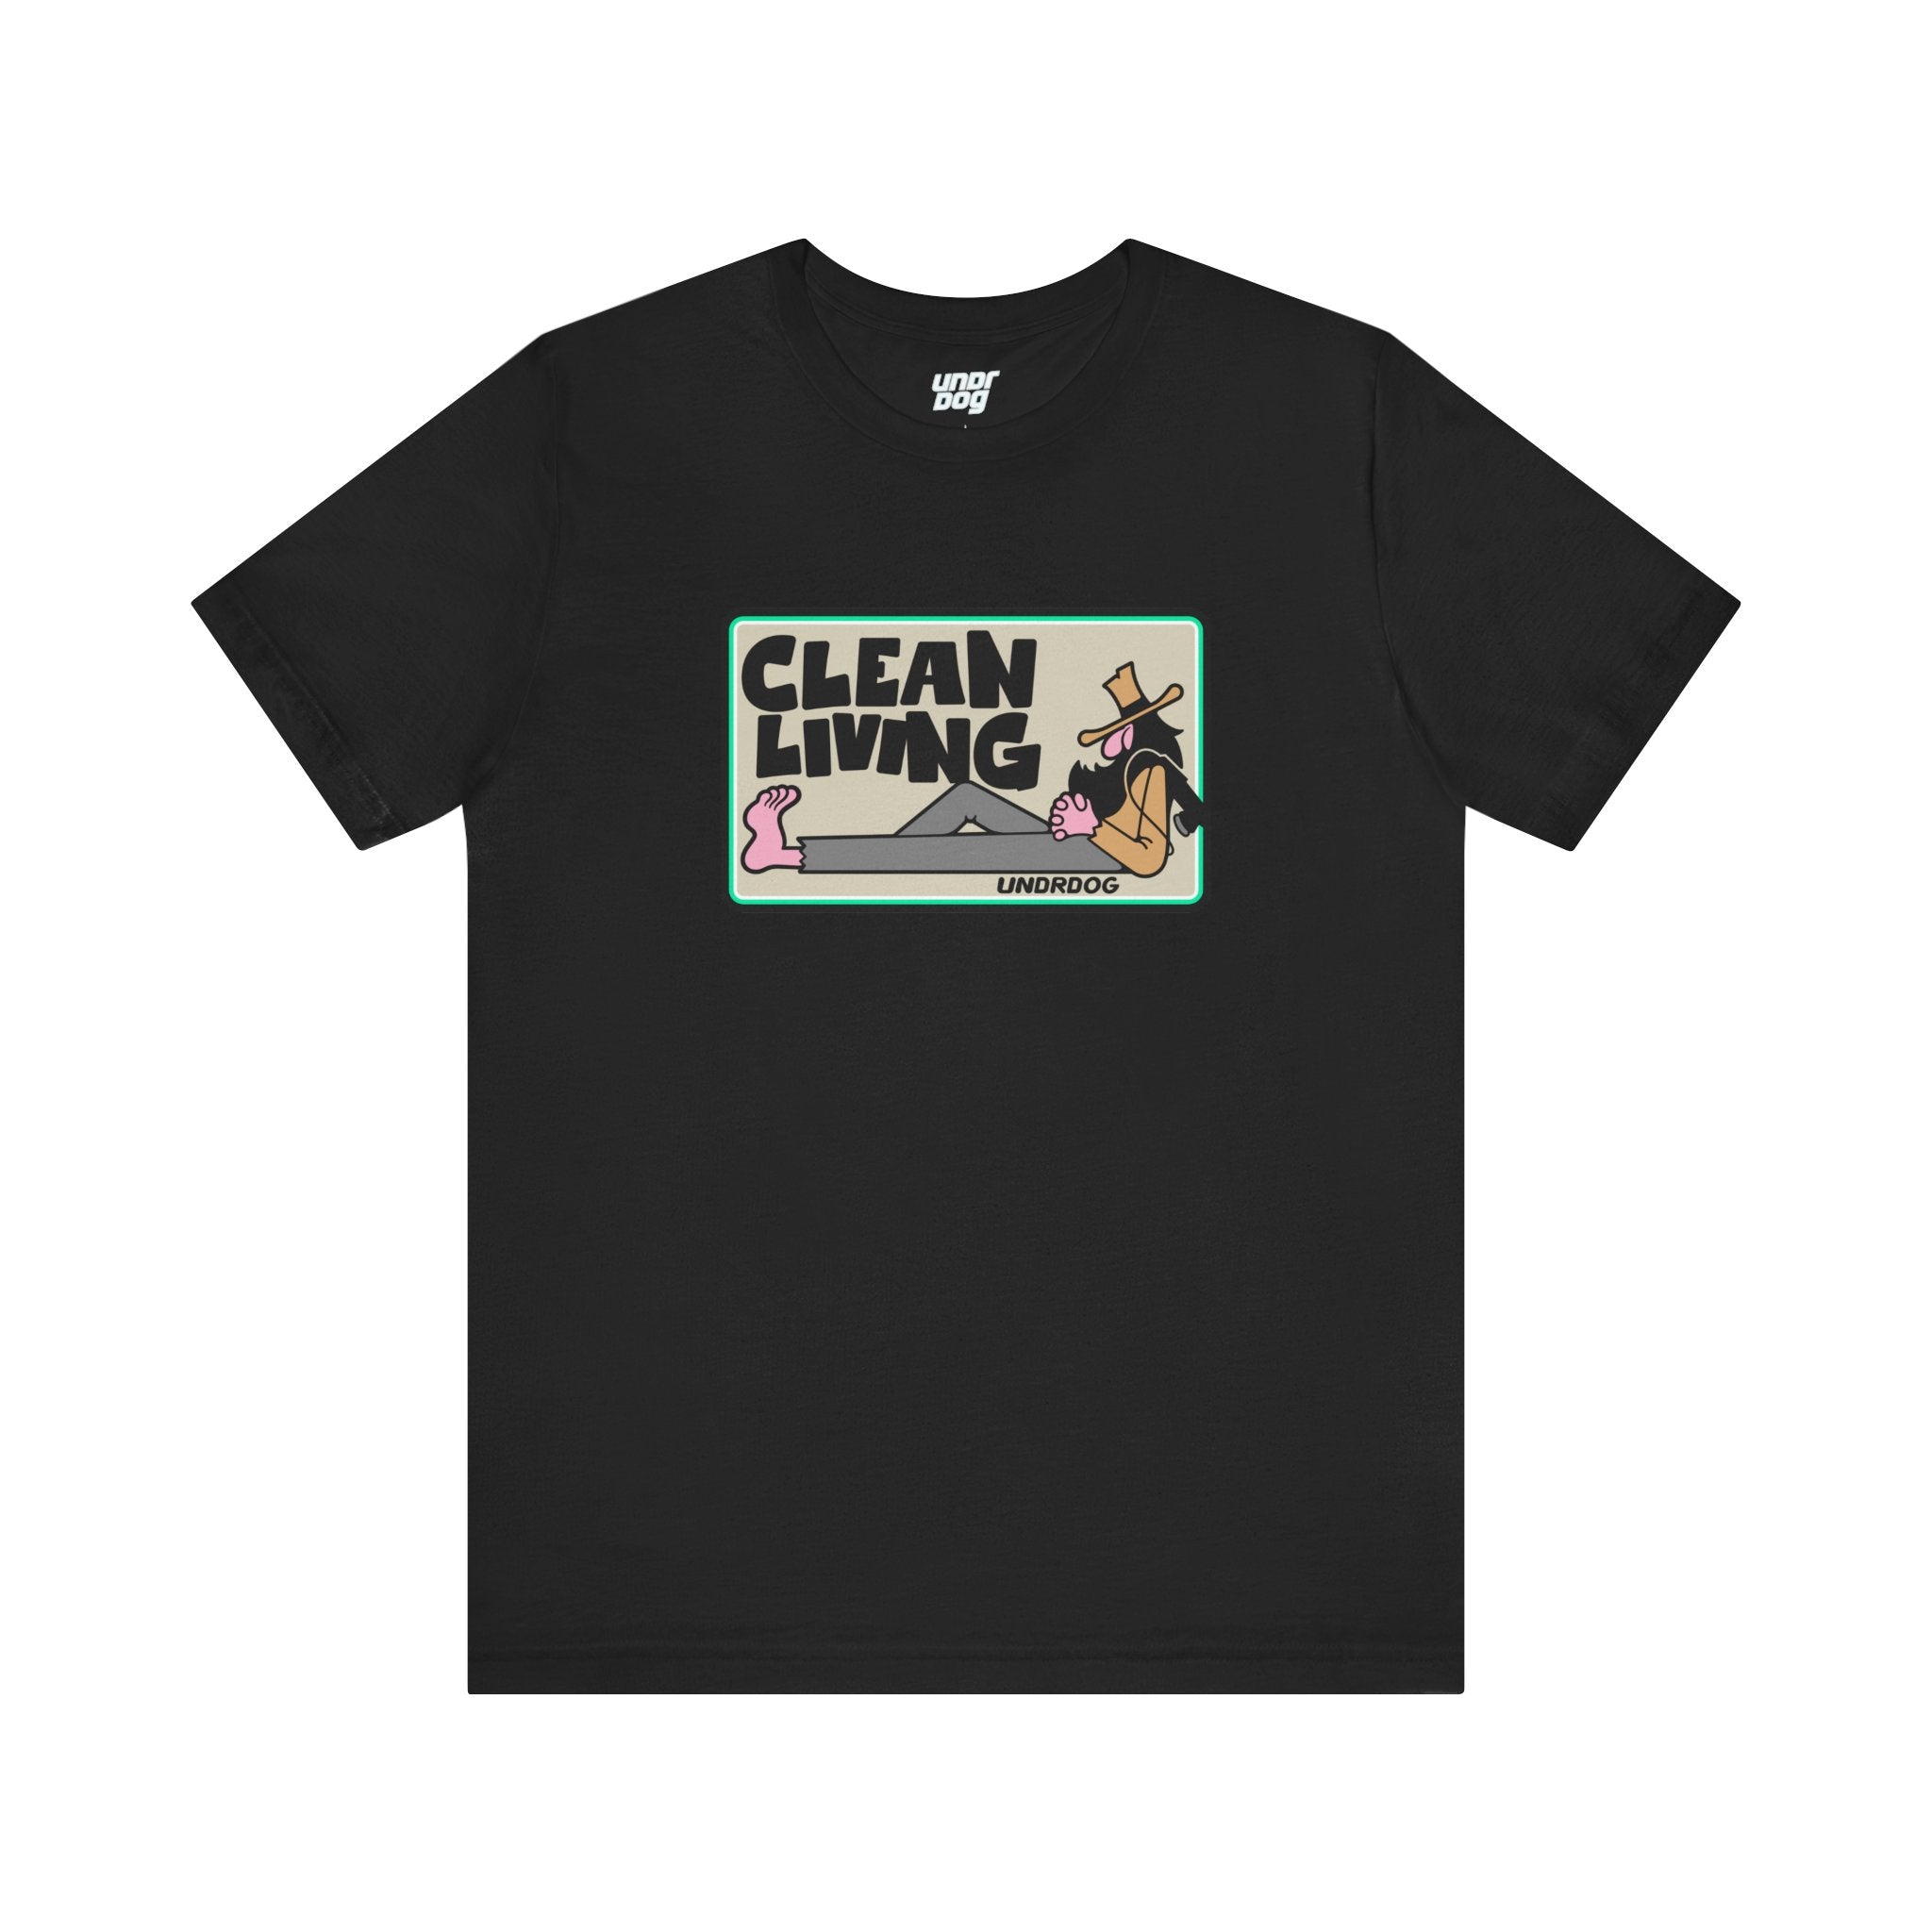 2826904068392612886_2048.jpg - Clean Living v3 by Undrdog Tee - Undrdog Surface Products